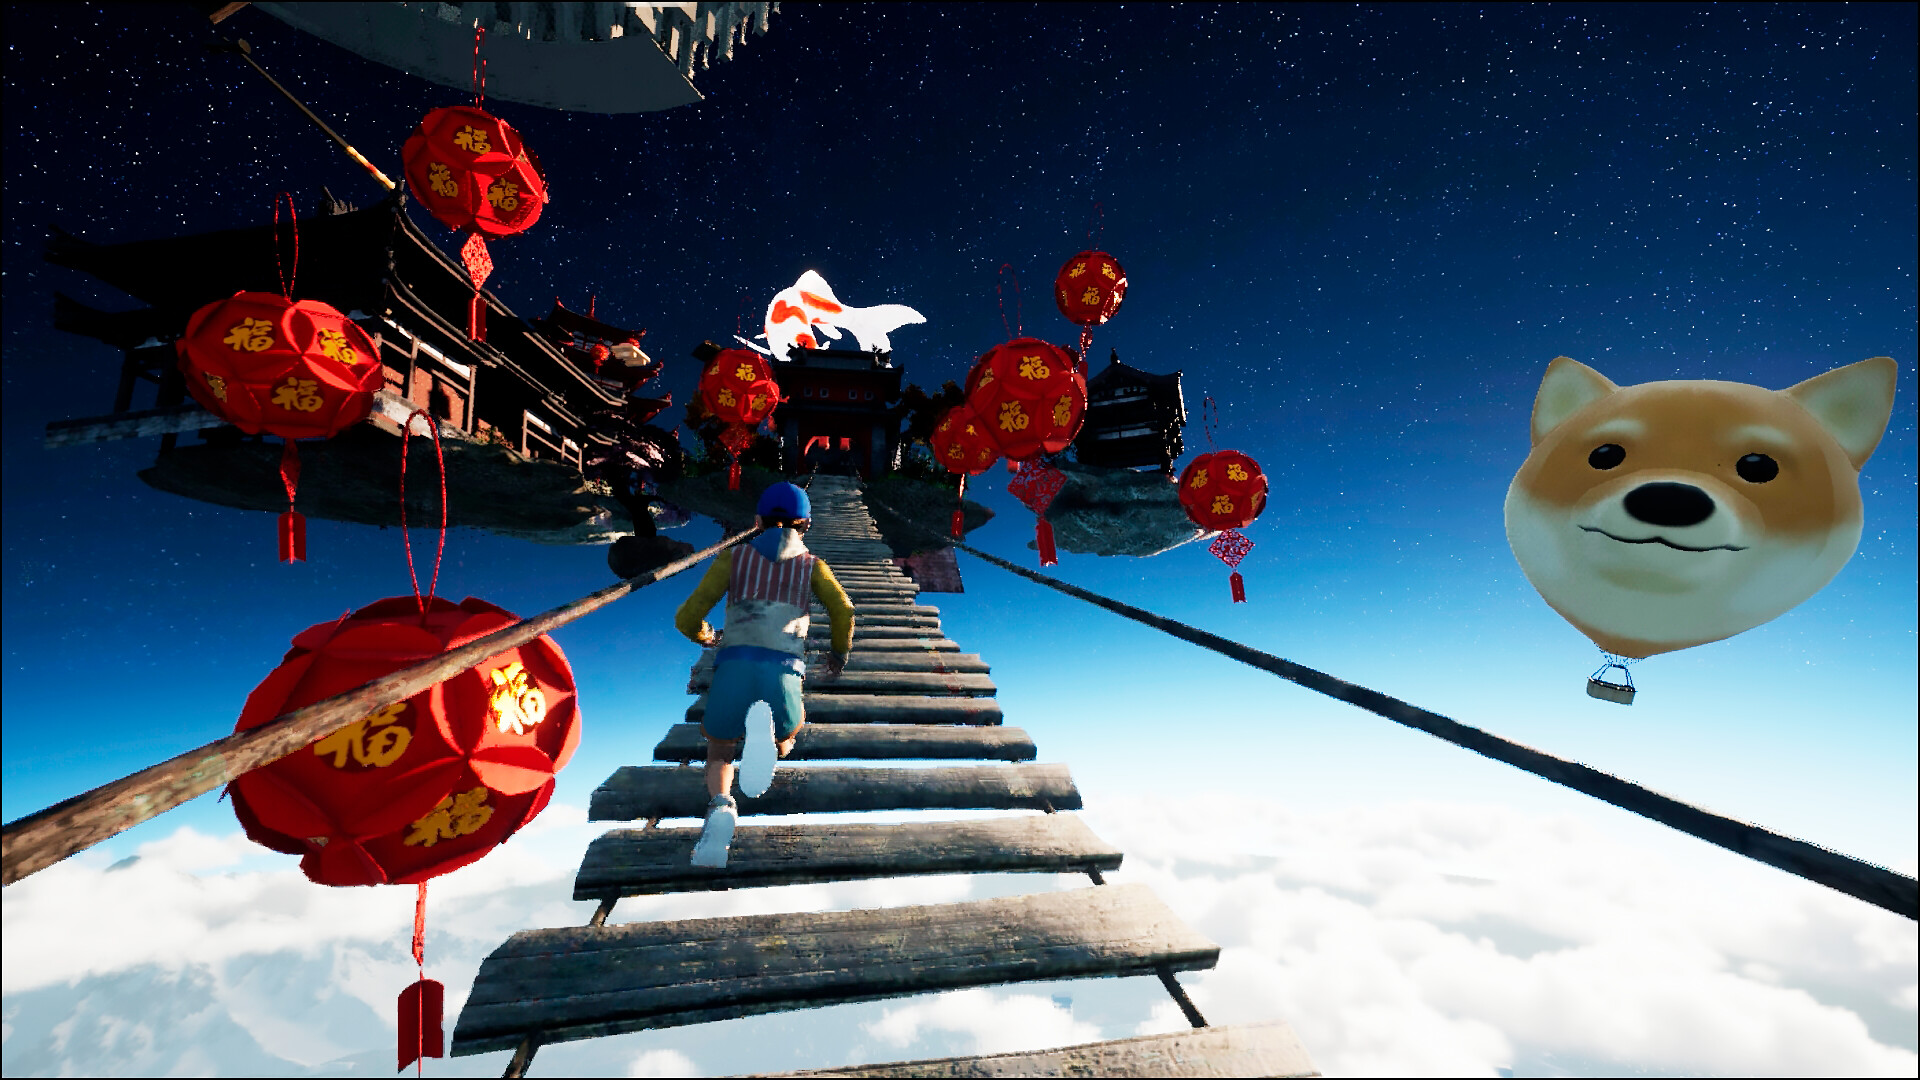 A player climbs towards the sky in Only Up!, running along a rickety bridge surrounded by massive red balloons and balloons in the shape of a Shiba Inu head.